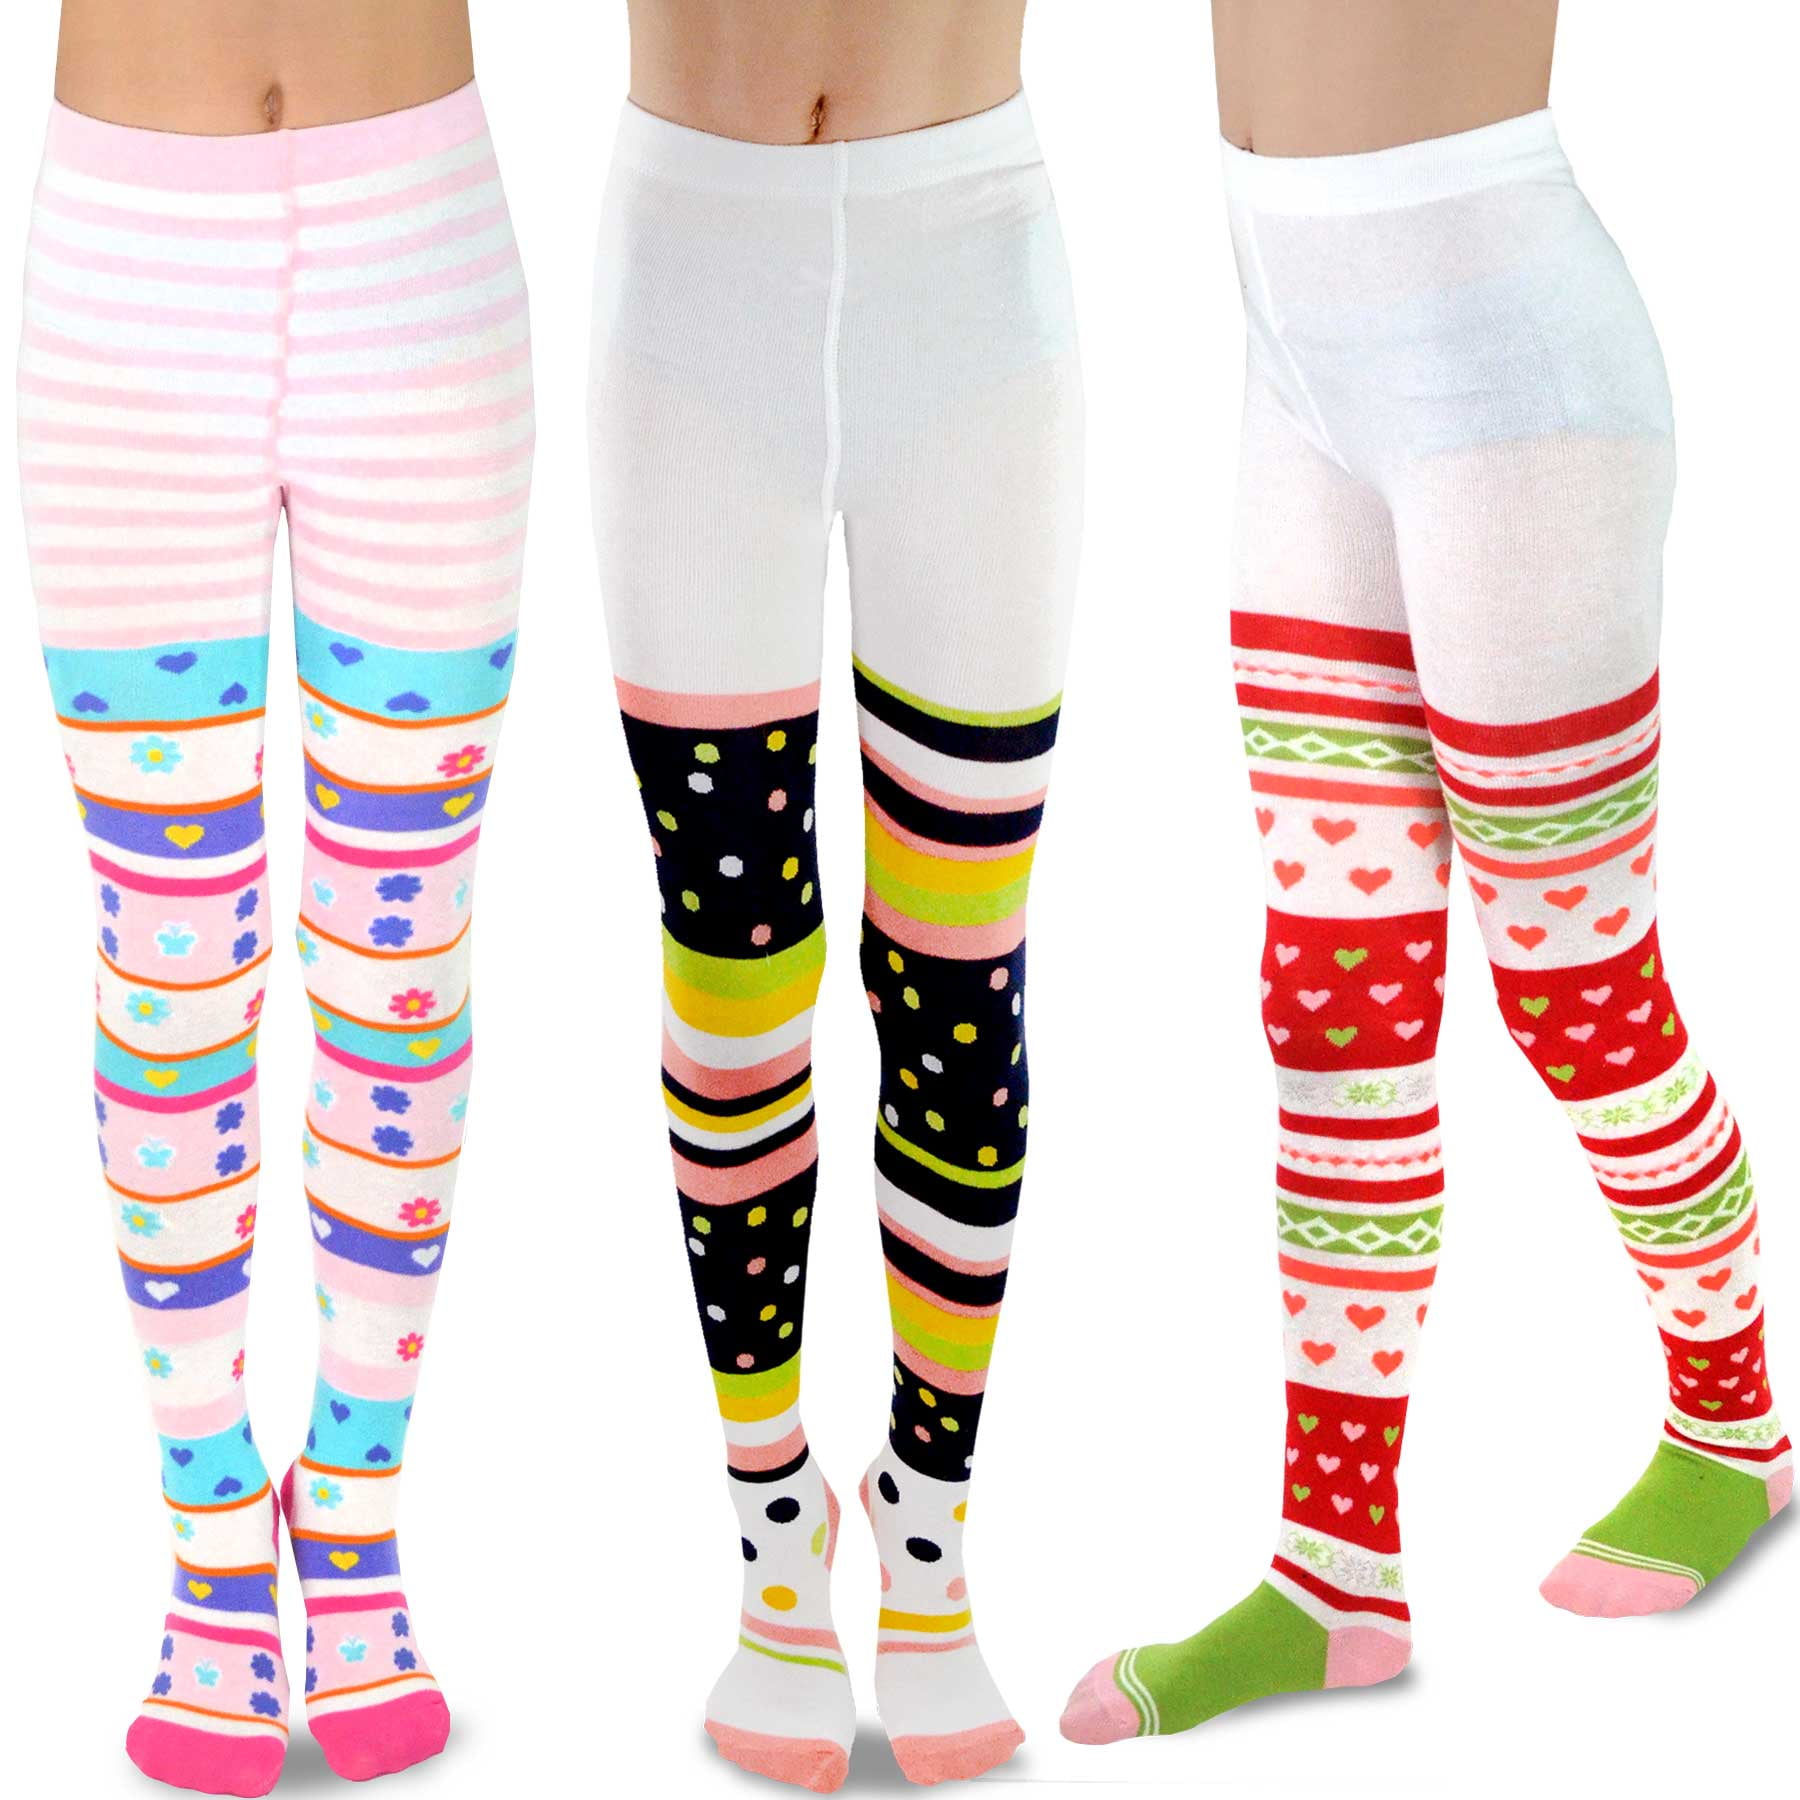 TeeHee Kids Girls Fashion Cotton Tights 3 Pair Pack (6-8 Years, Colorful) 